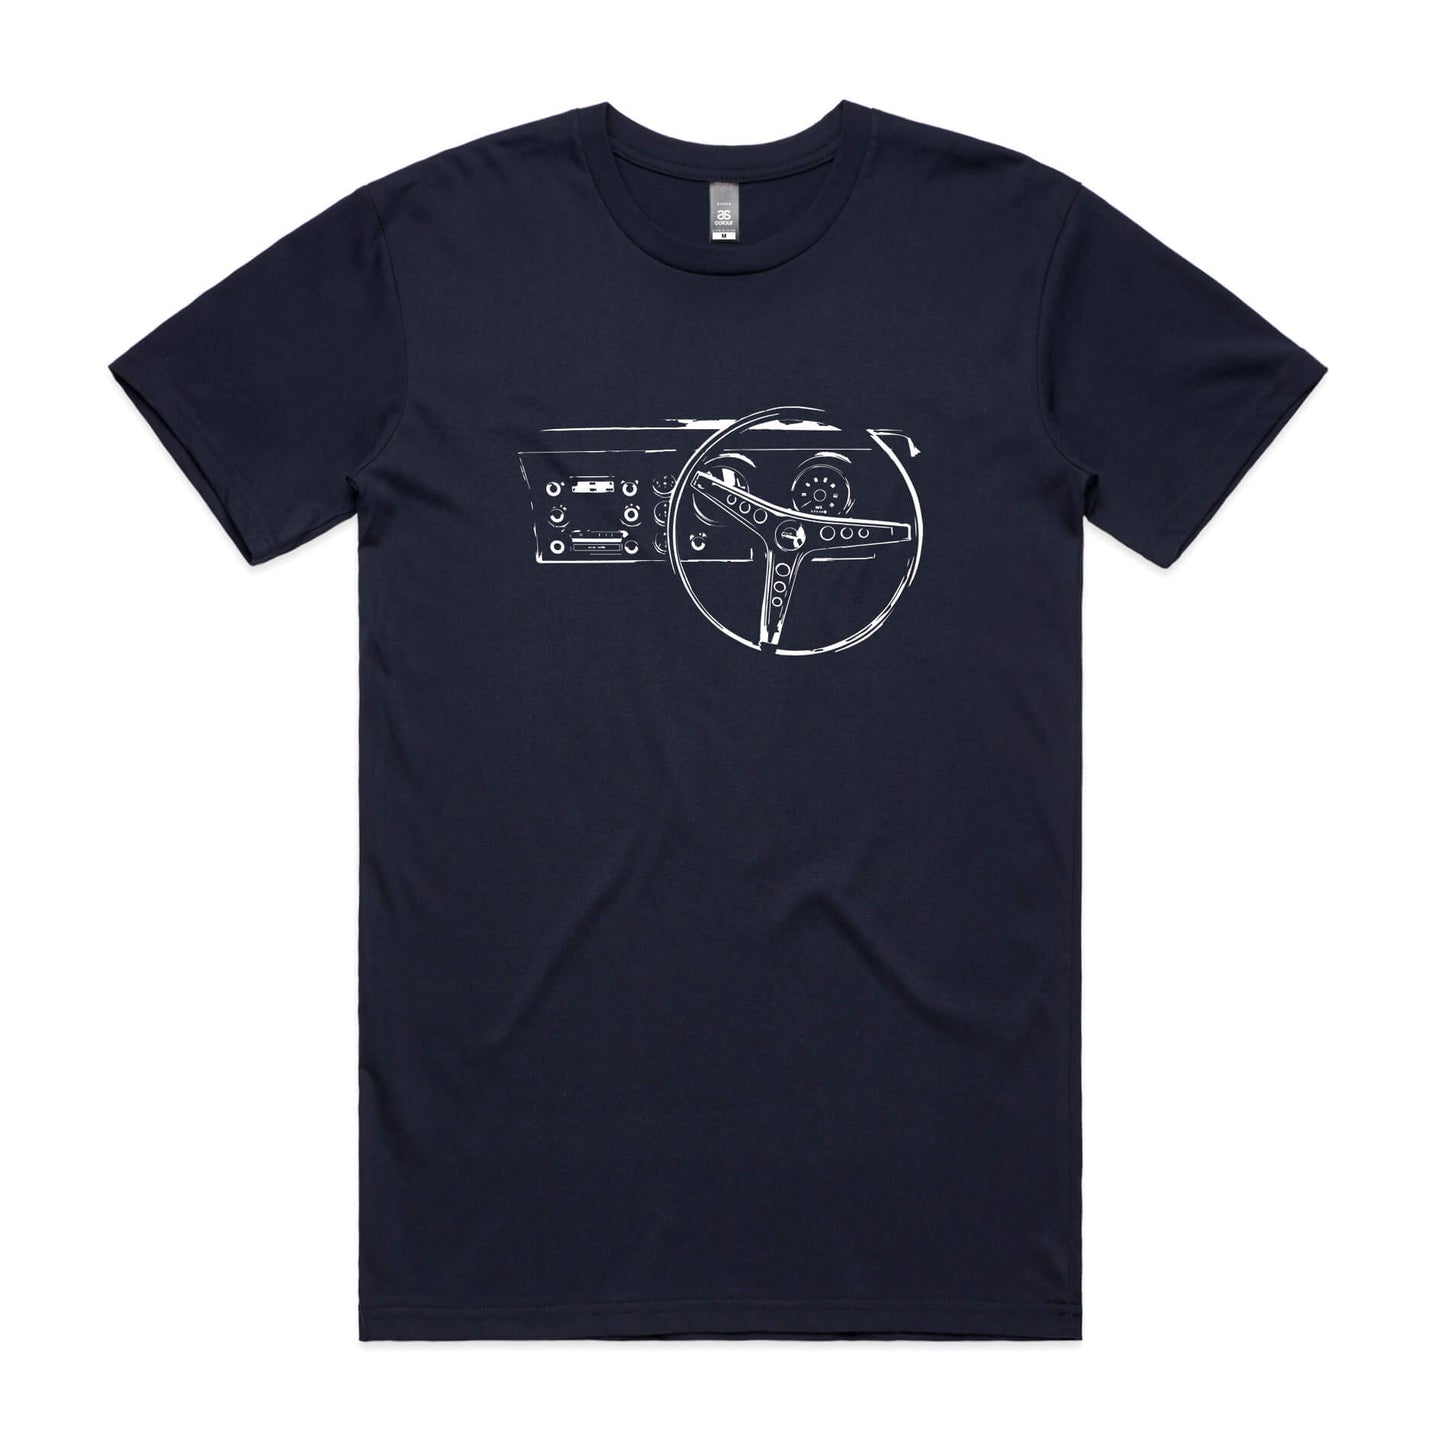 Falcon dash t-shirt in navy blue with a Ford XY Falcon dashboard printed on the front